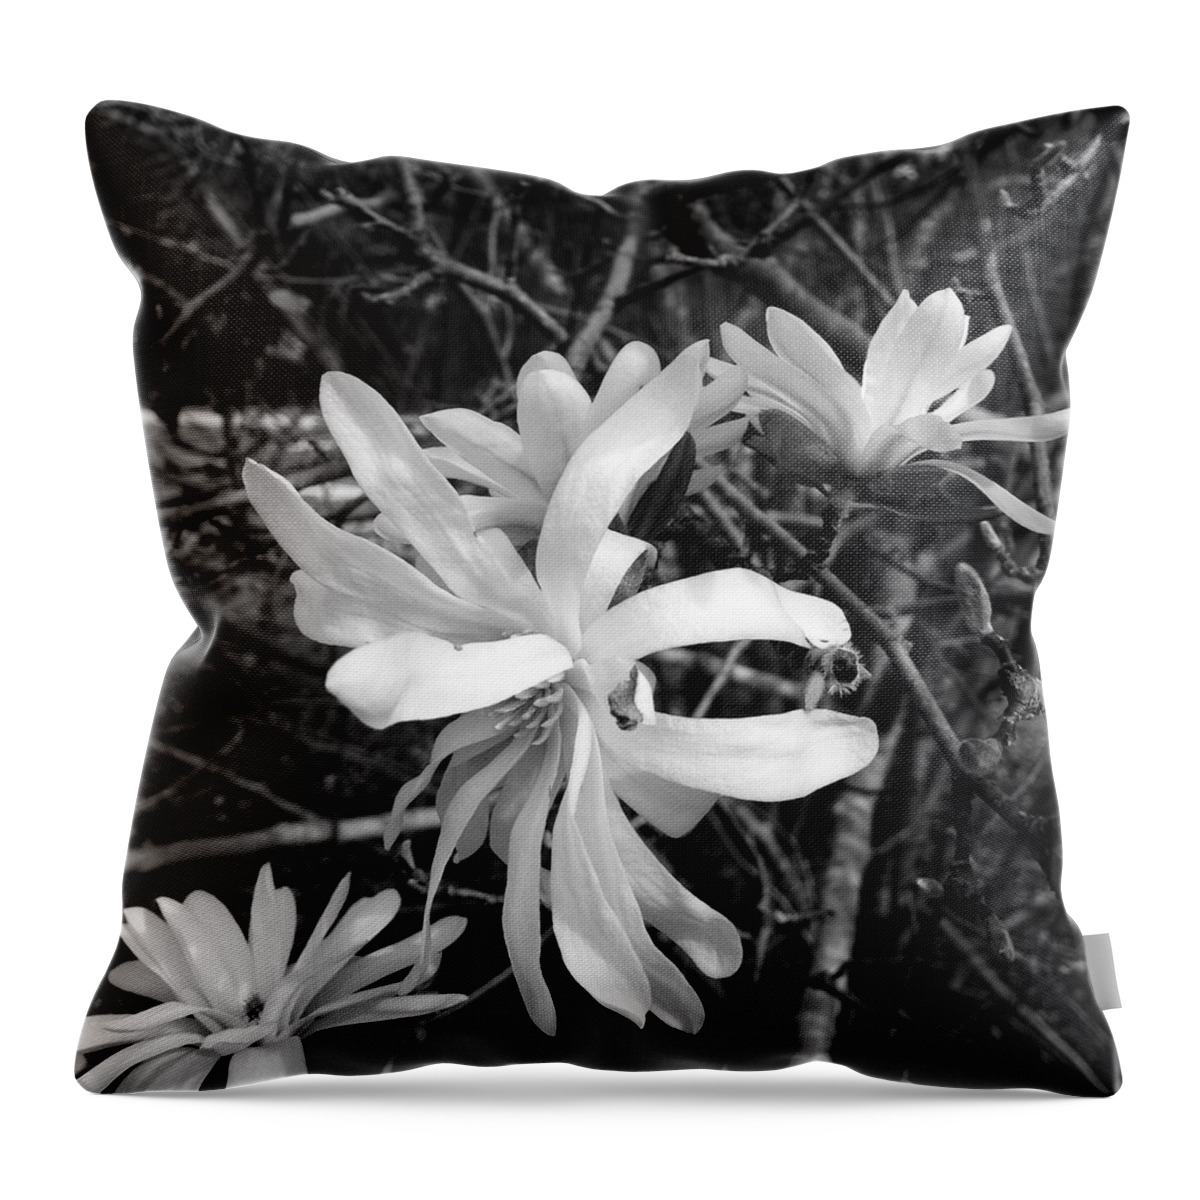  Throw Pillow featuring the photograph Star Magnolia by Heather E Harman